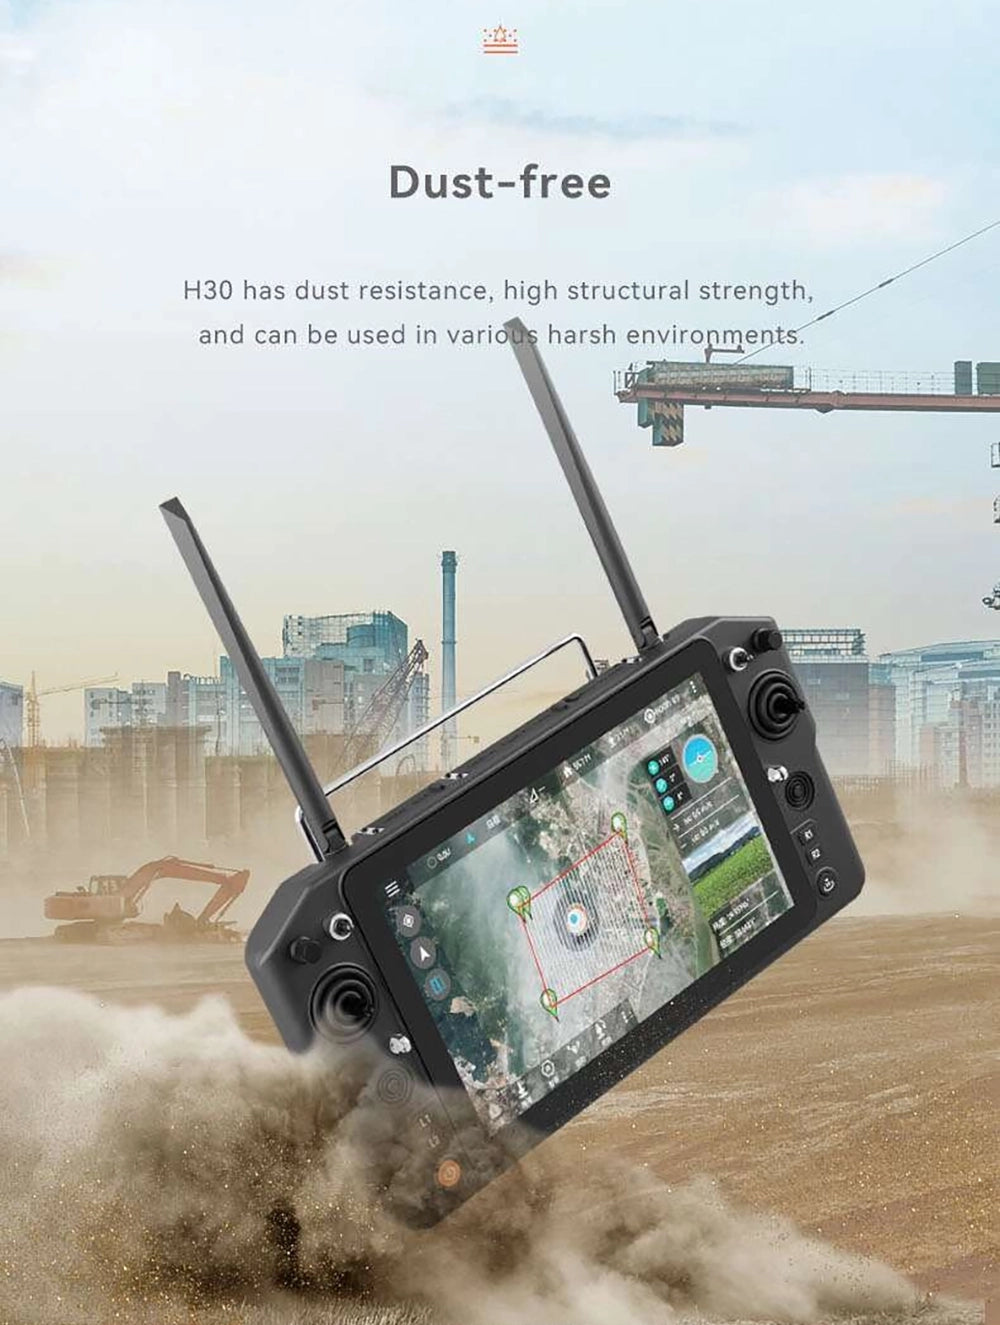 dust-free H30 has dust resistance, high structural strength, and can be used in various